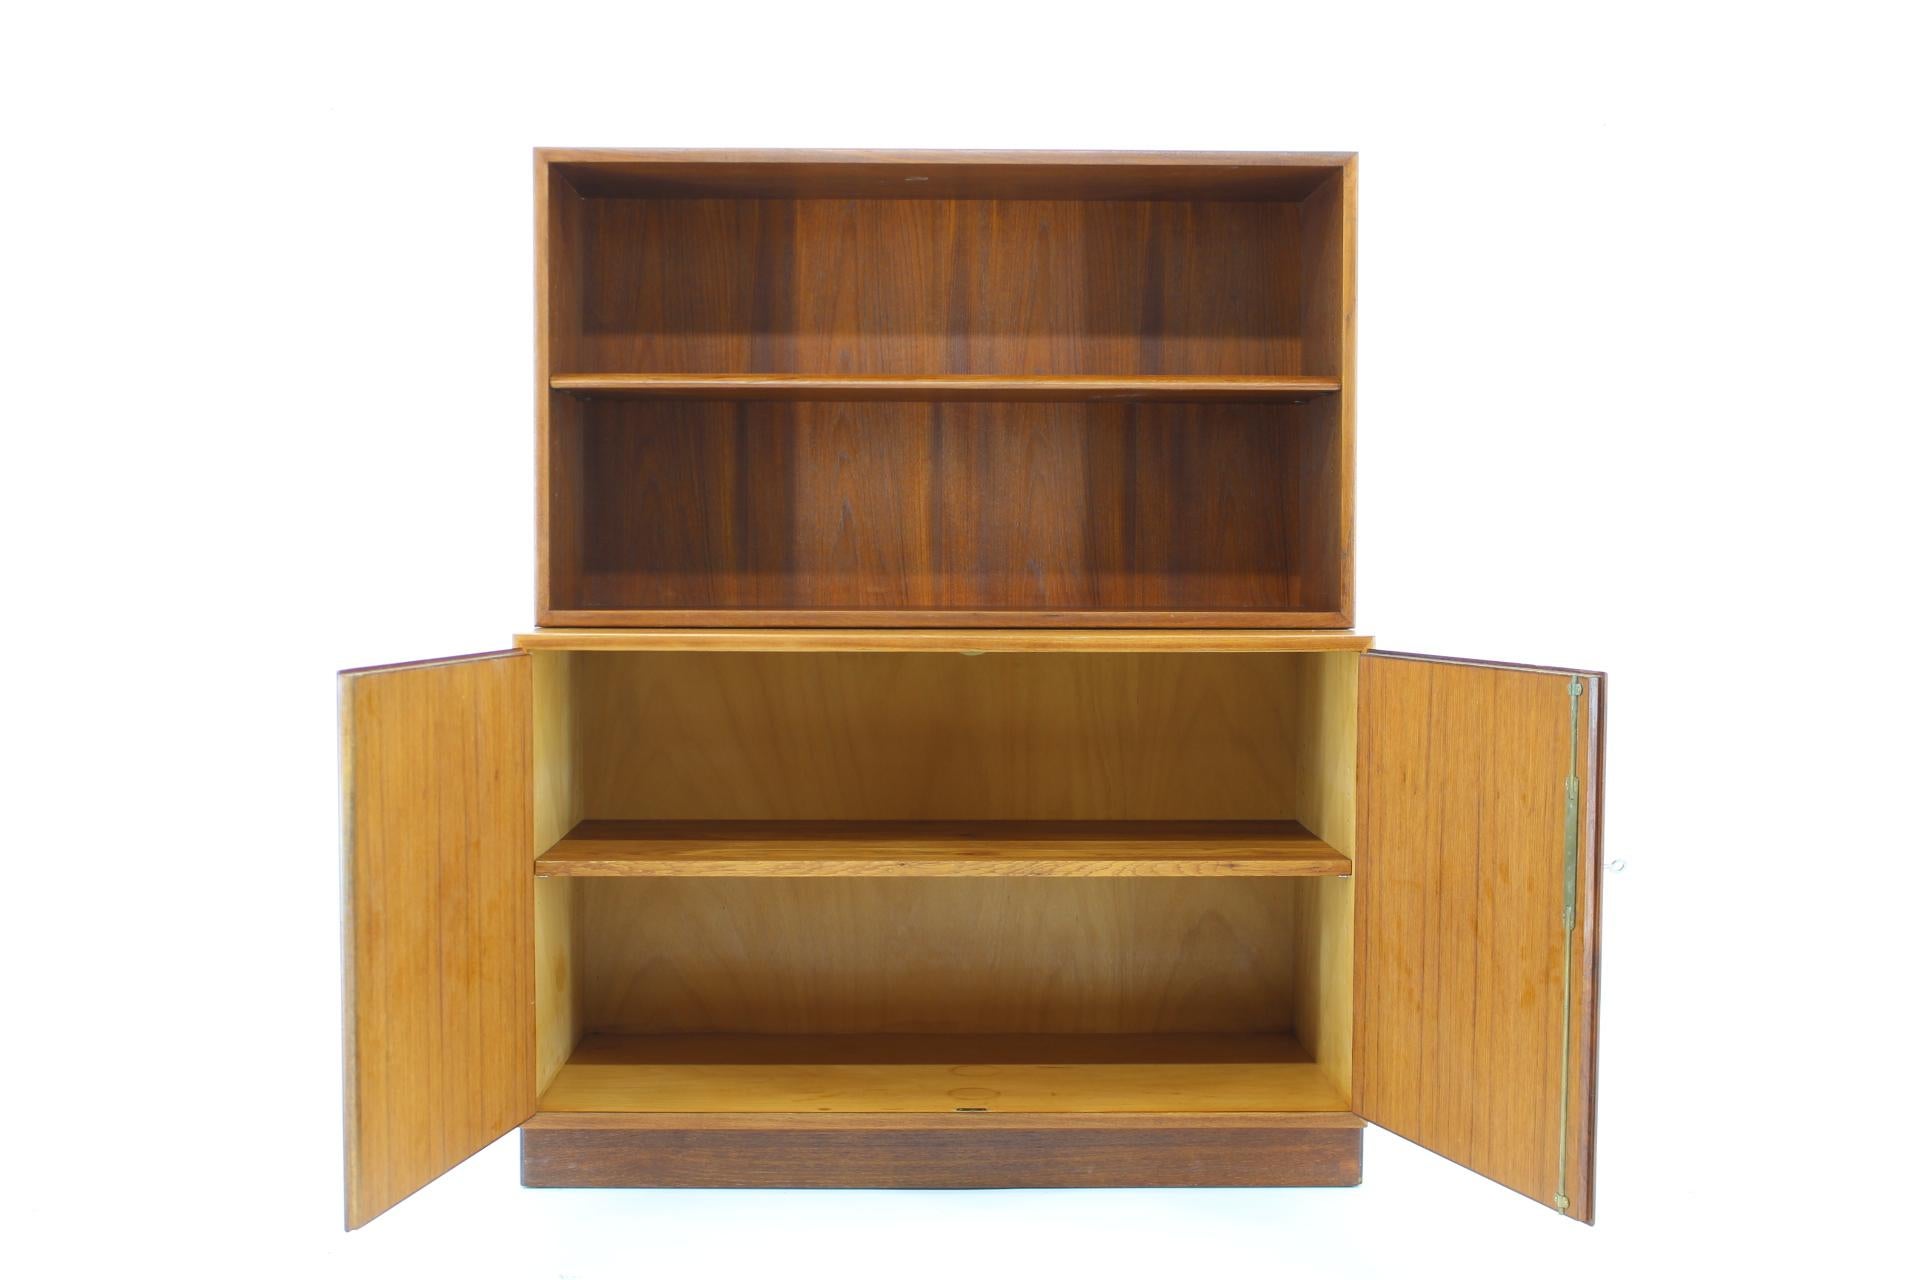 - Bookcase can be separated from cabinet
- Adjustable shelves
- The item has been carefully refurbished.
  